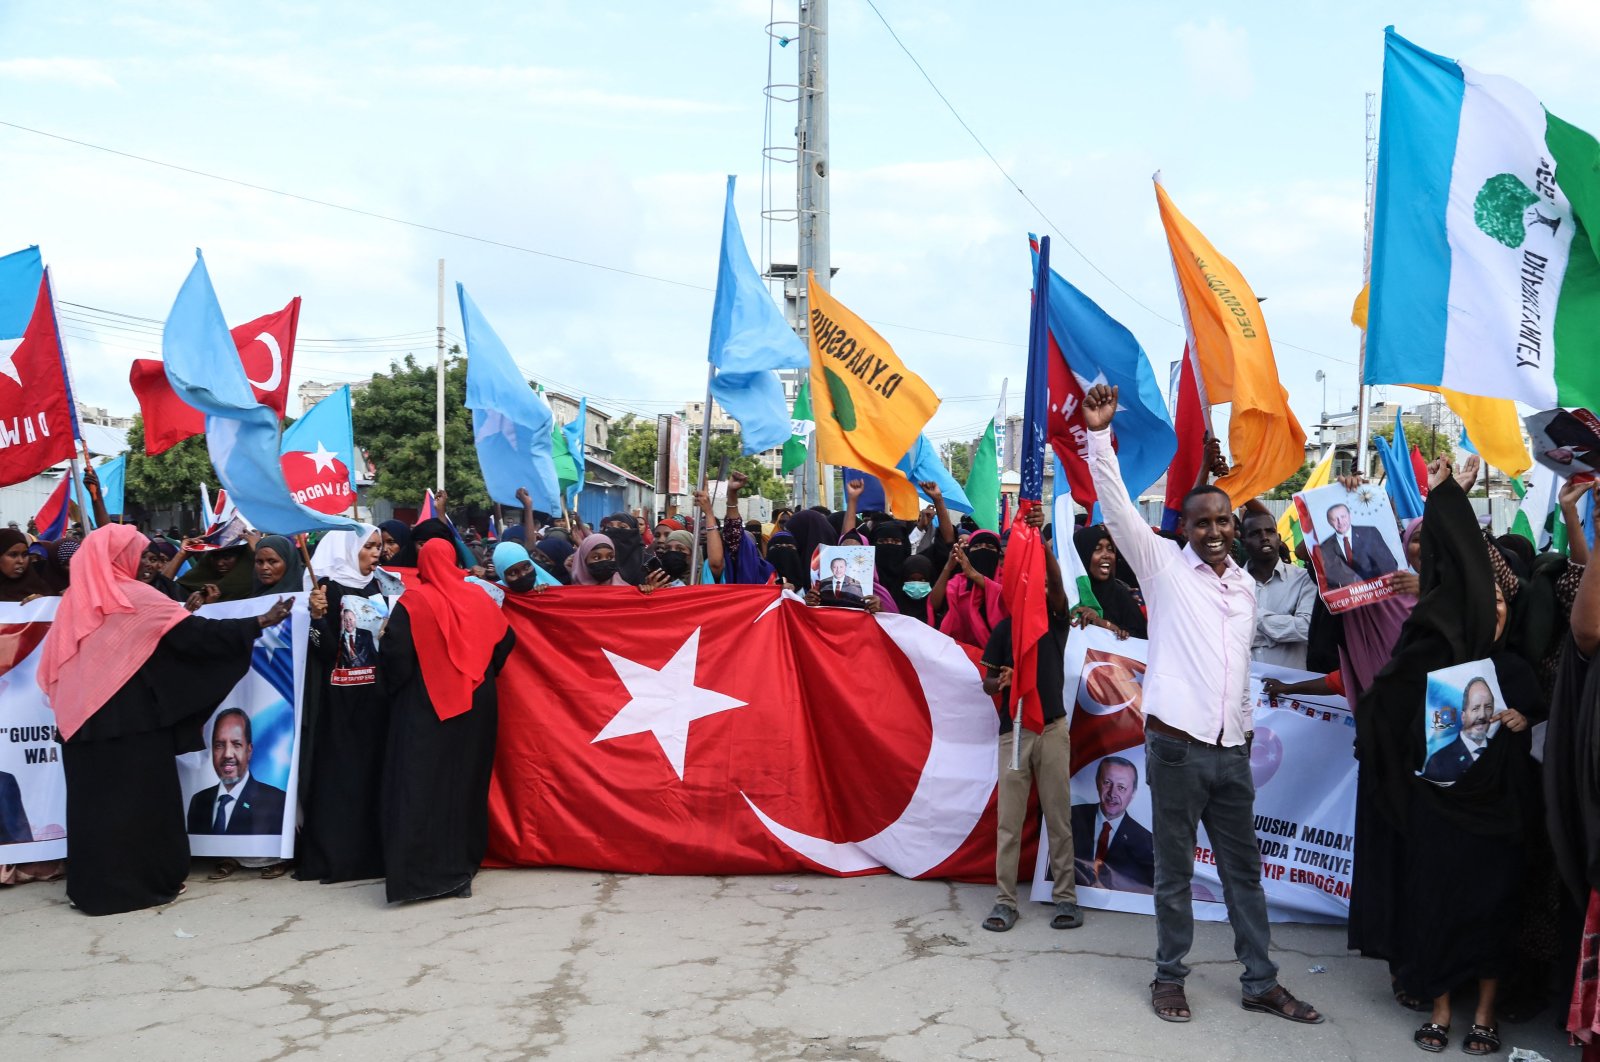 Somalis celebrate the victory of President Recep Tayyip Erdoğan after he won the presidential run-off election during the celebration organized by the government in Mogadishu, Somalia, May 29, 2023. (AFP Photo)